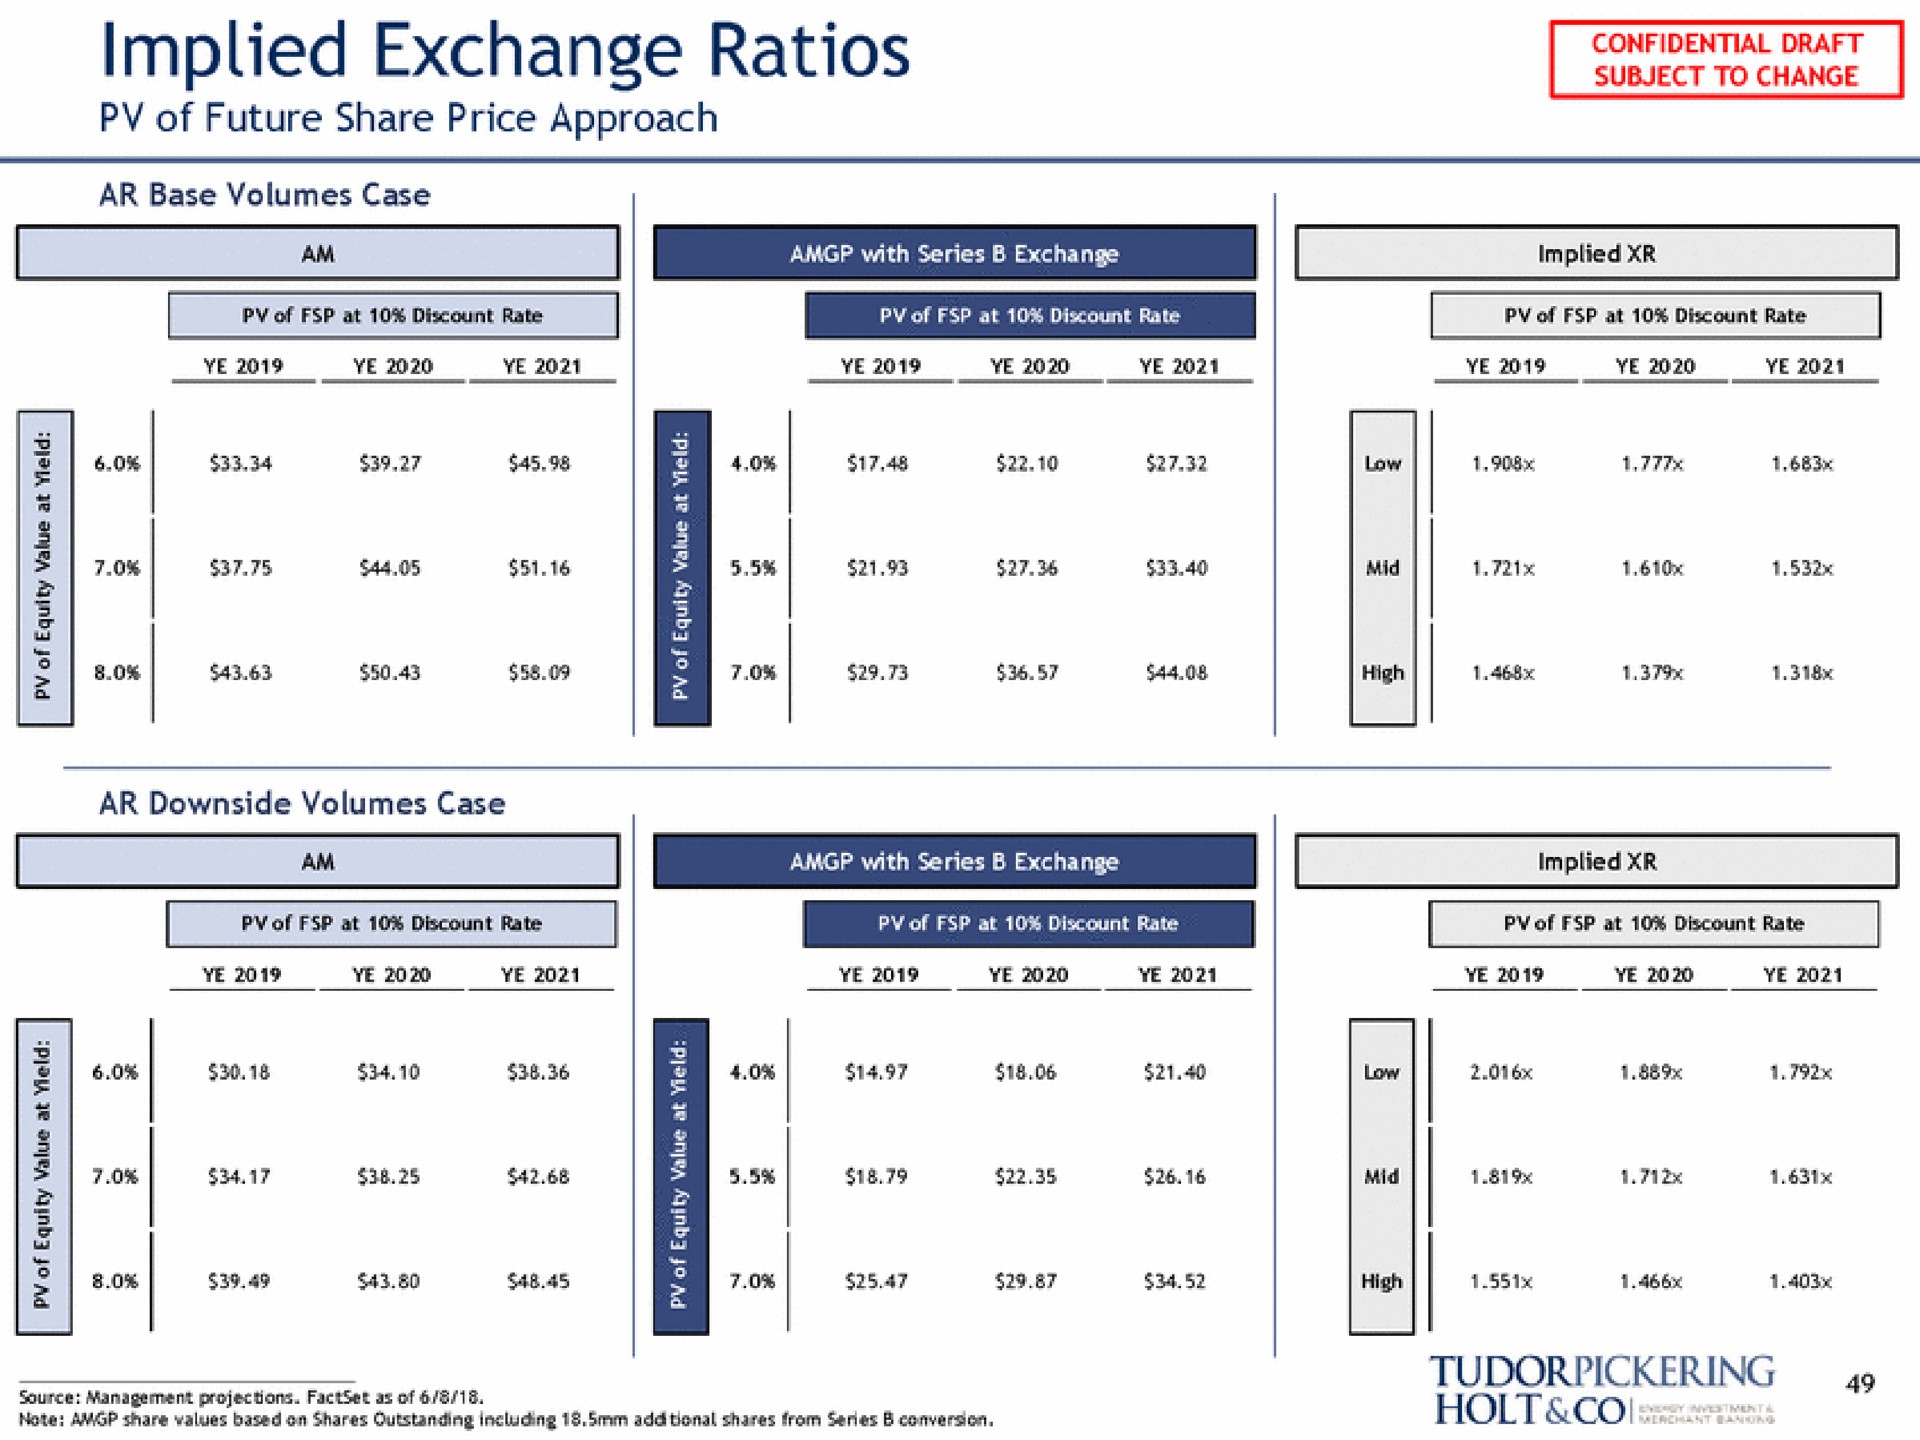 implied exchange ratios of future share price approach a | Tudor, Pickering, Holt & Co